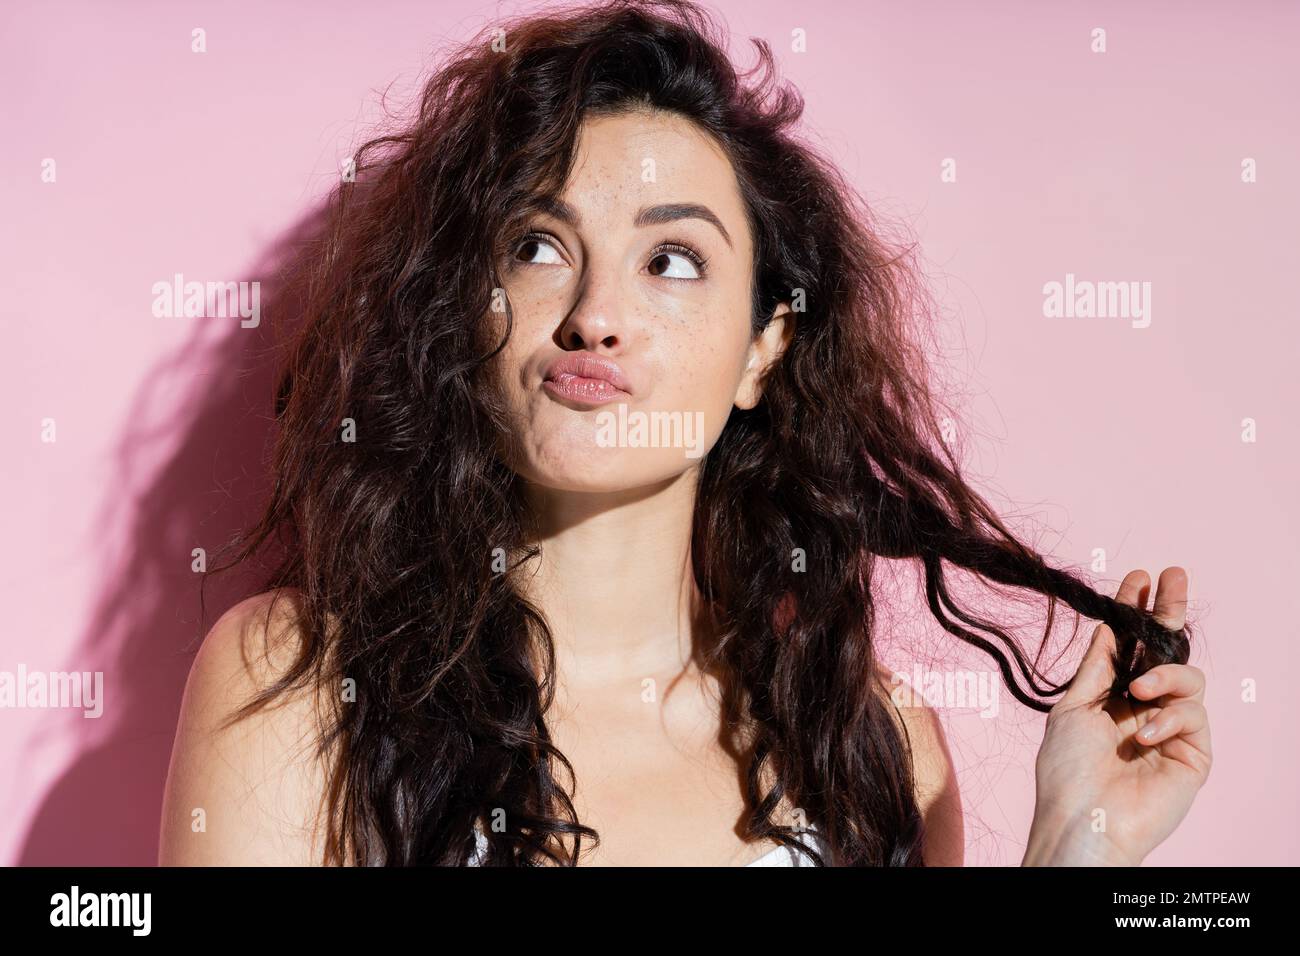 Pensive woman touching hair and pouting lips on pink background,stock image Stock Photo